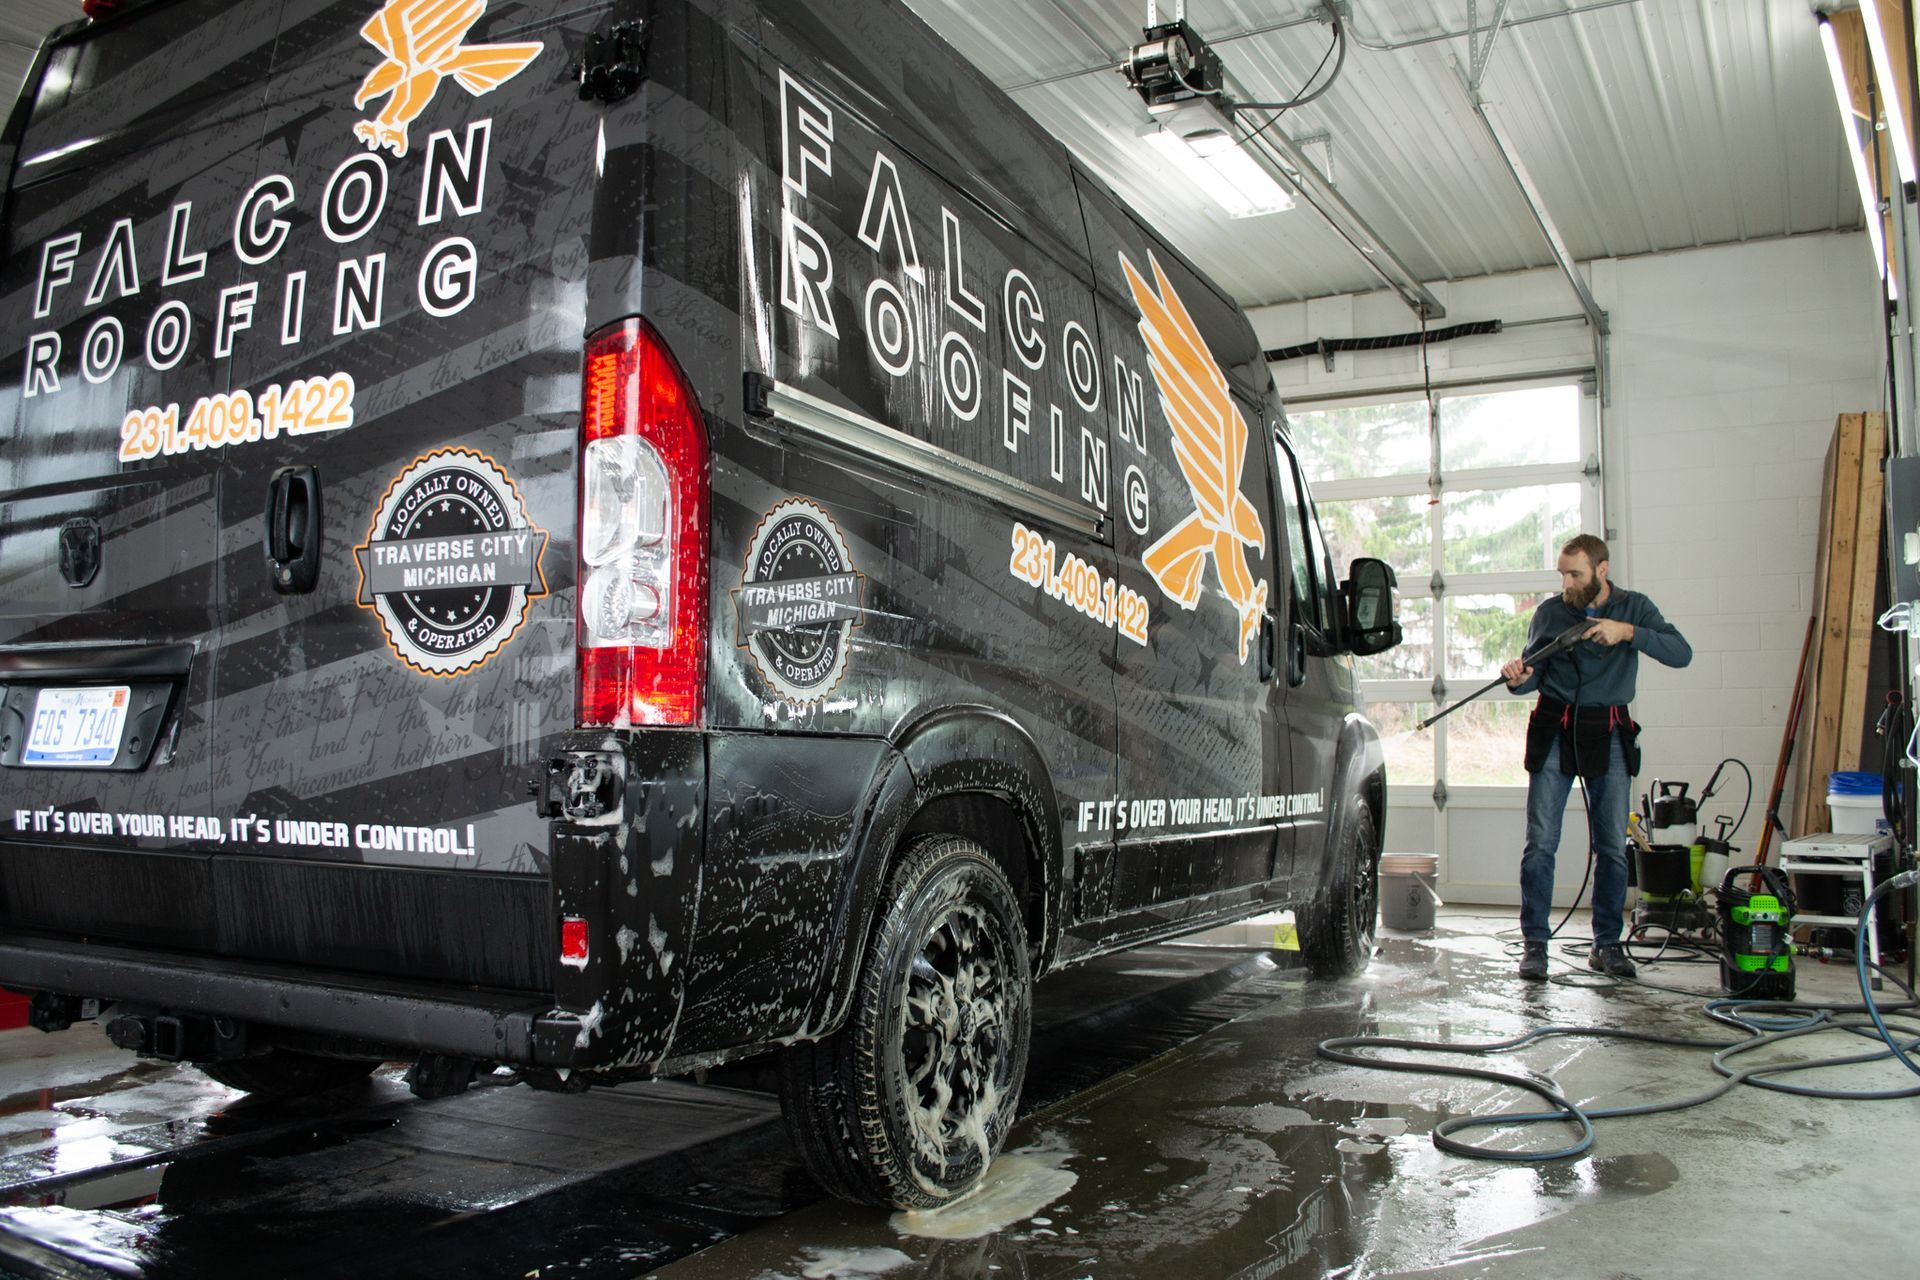 A service van is power washed in our Acme Auto Spa shop.